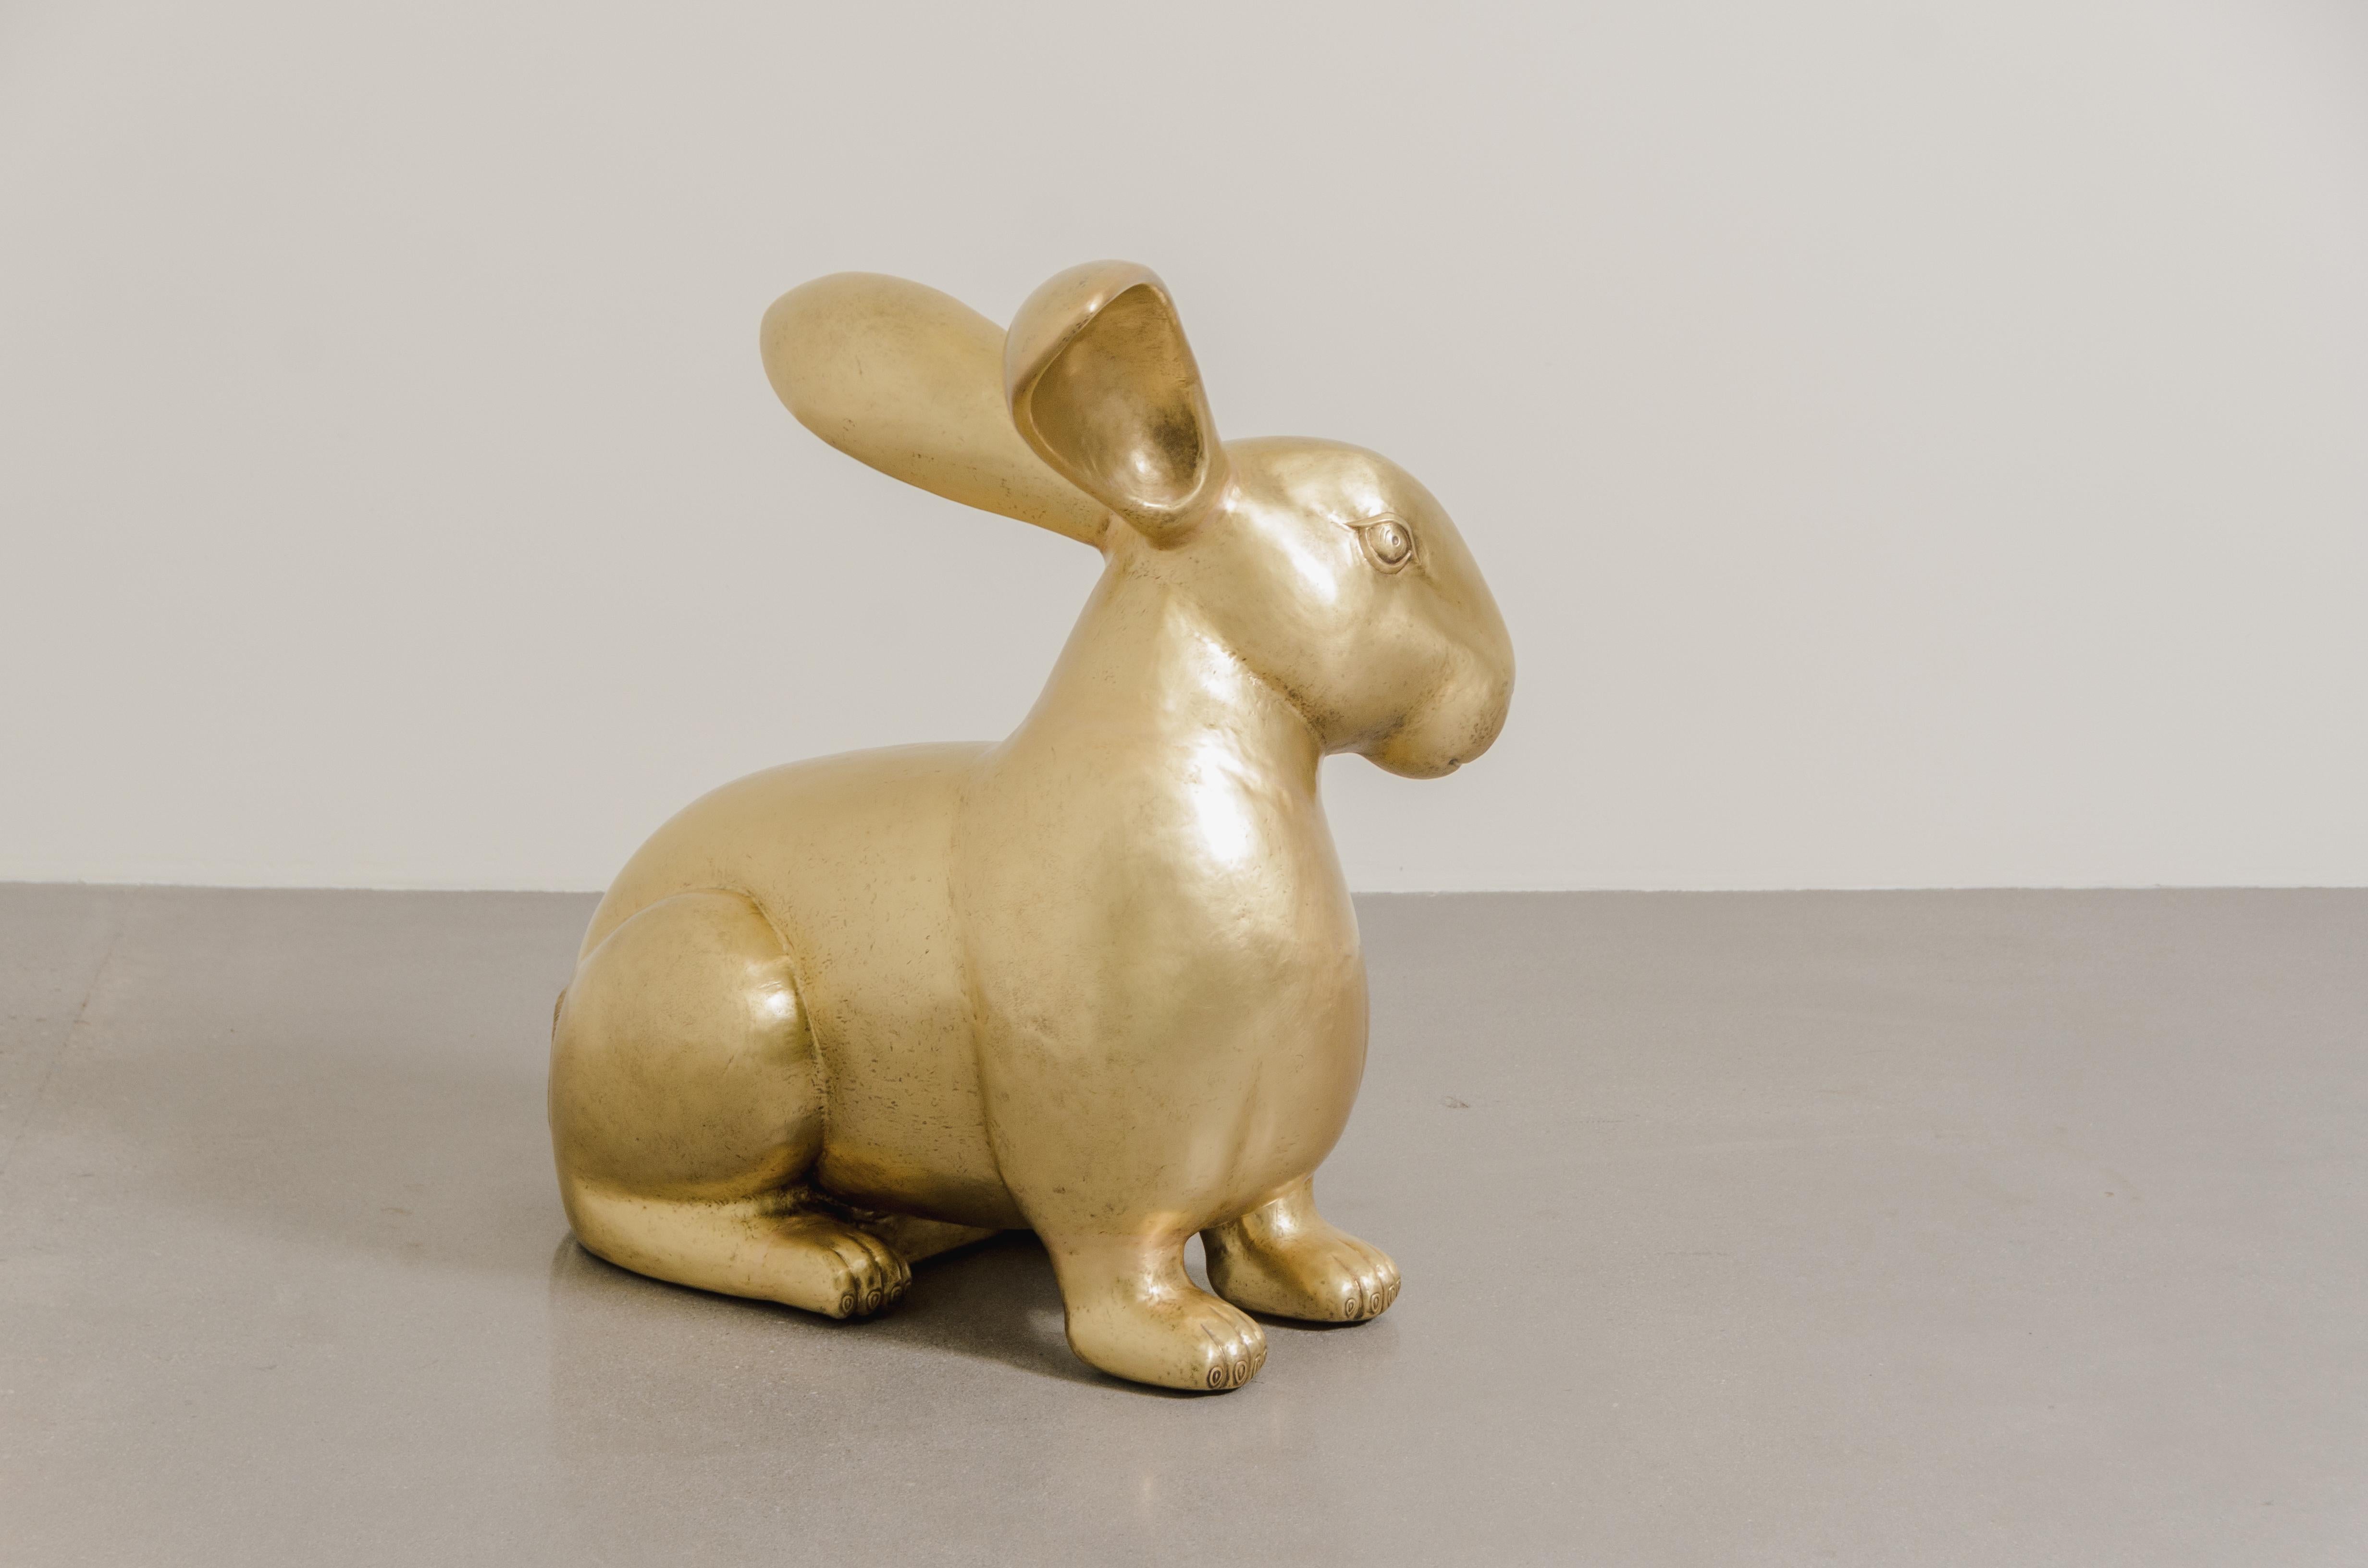 Contemporary Rabbit Sculpture in Brass by Robert Kuo, Hand Repoussé, Limited For Sale 4